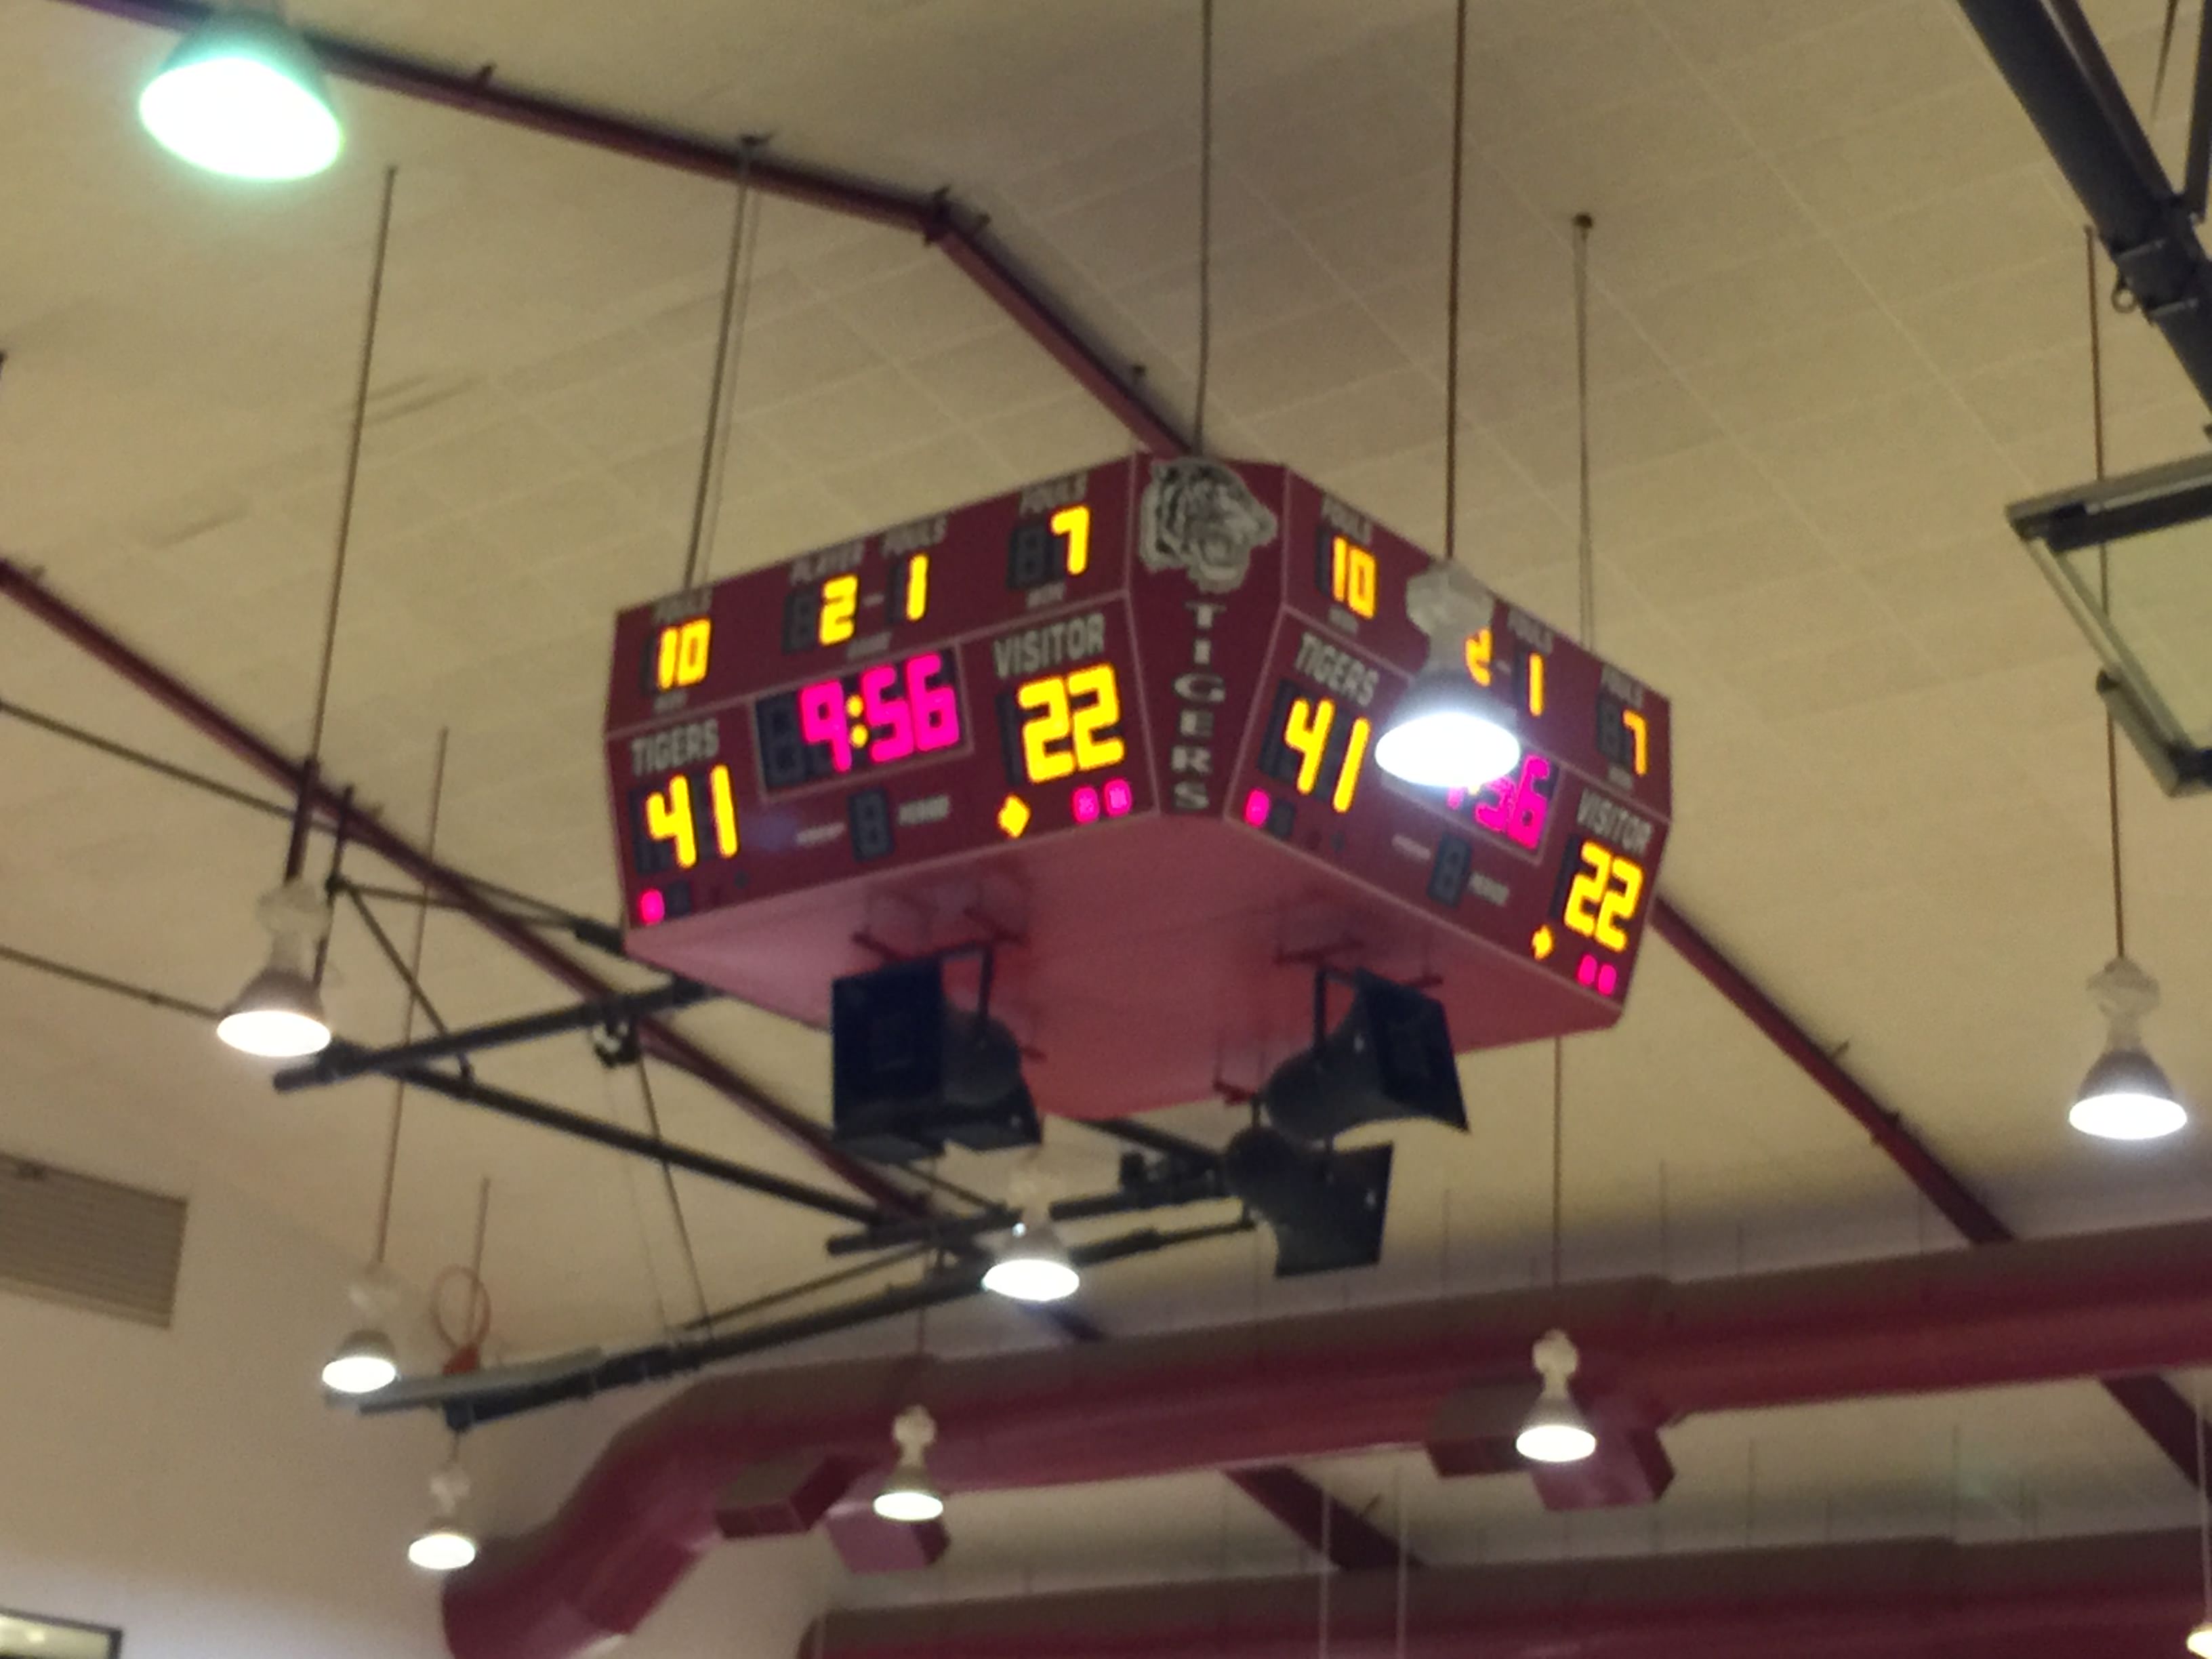 A comfortable score for our Slaton Tigers at the half.